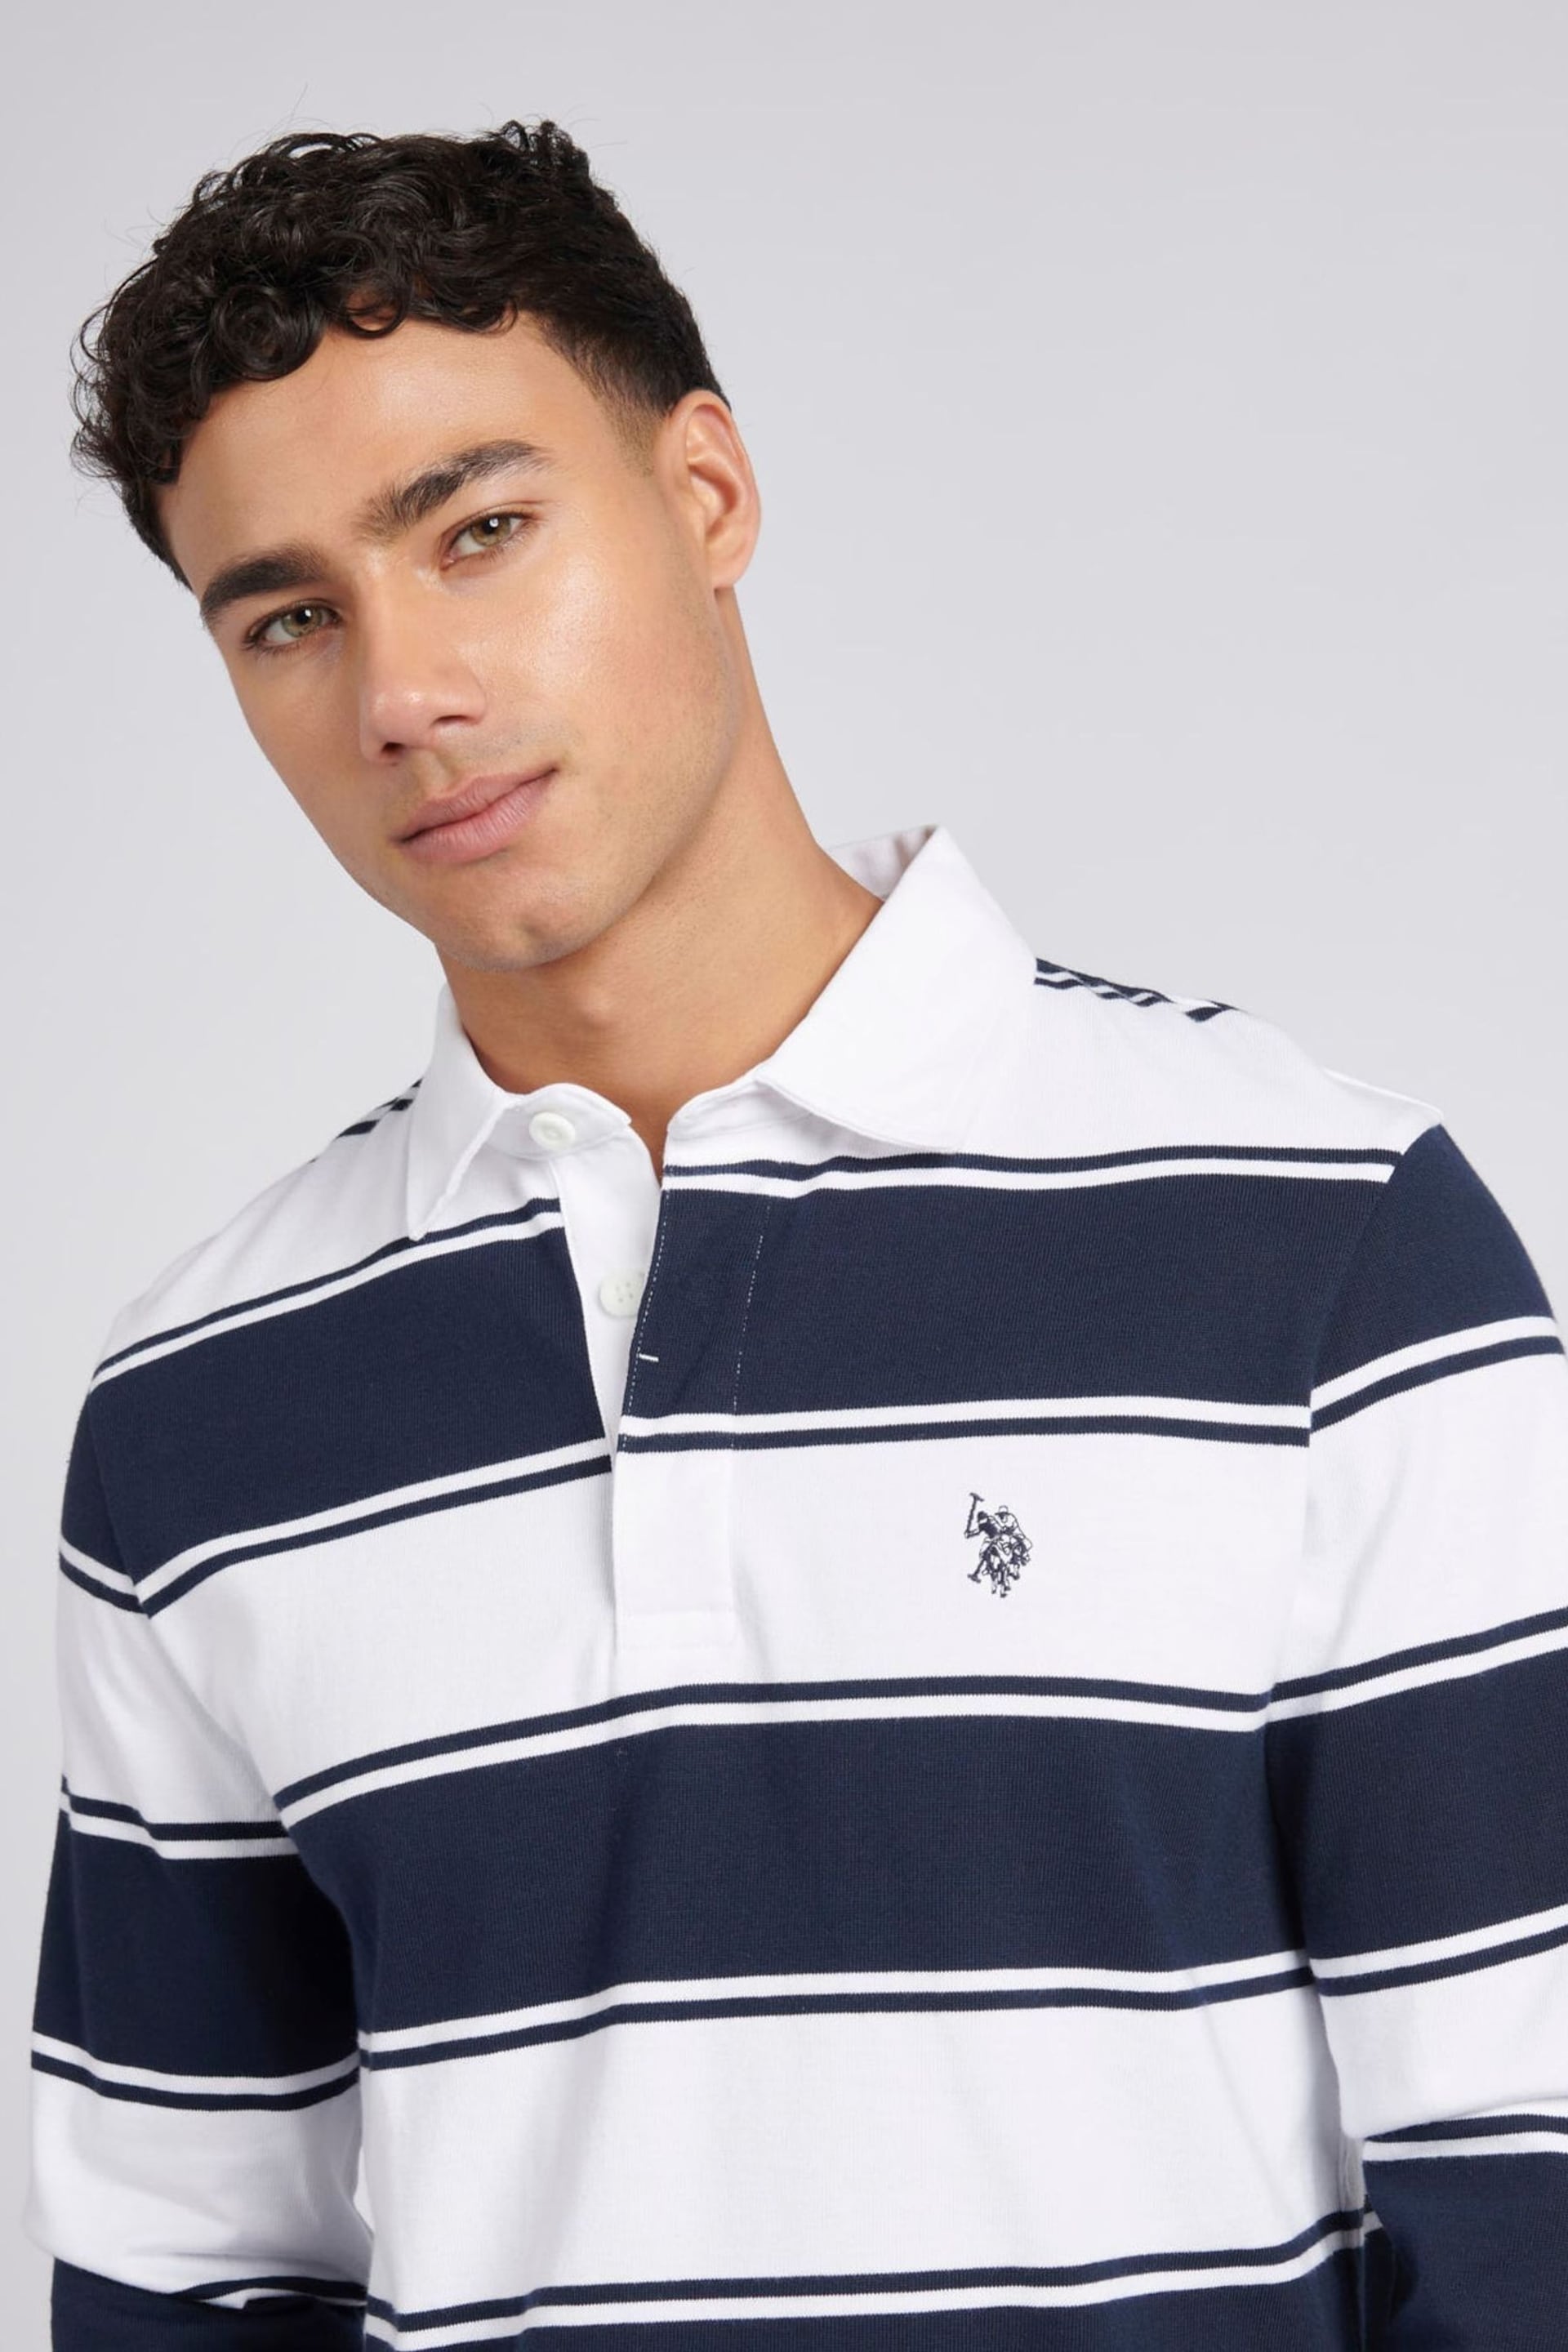 U.S. Polo Assn. Mens Regular Fit Striped Rugby White Shirt - Image 3 of 8